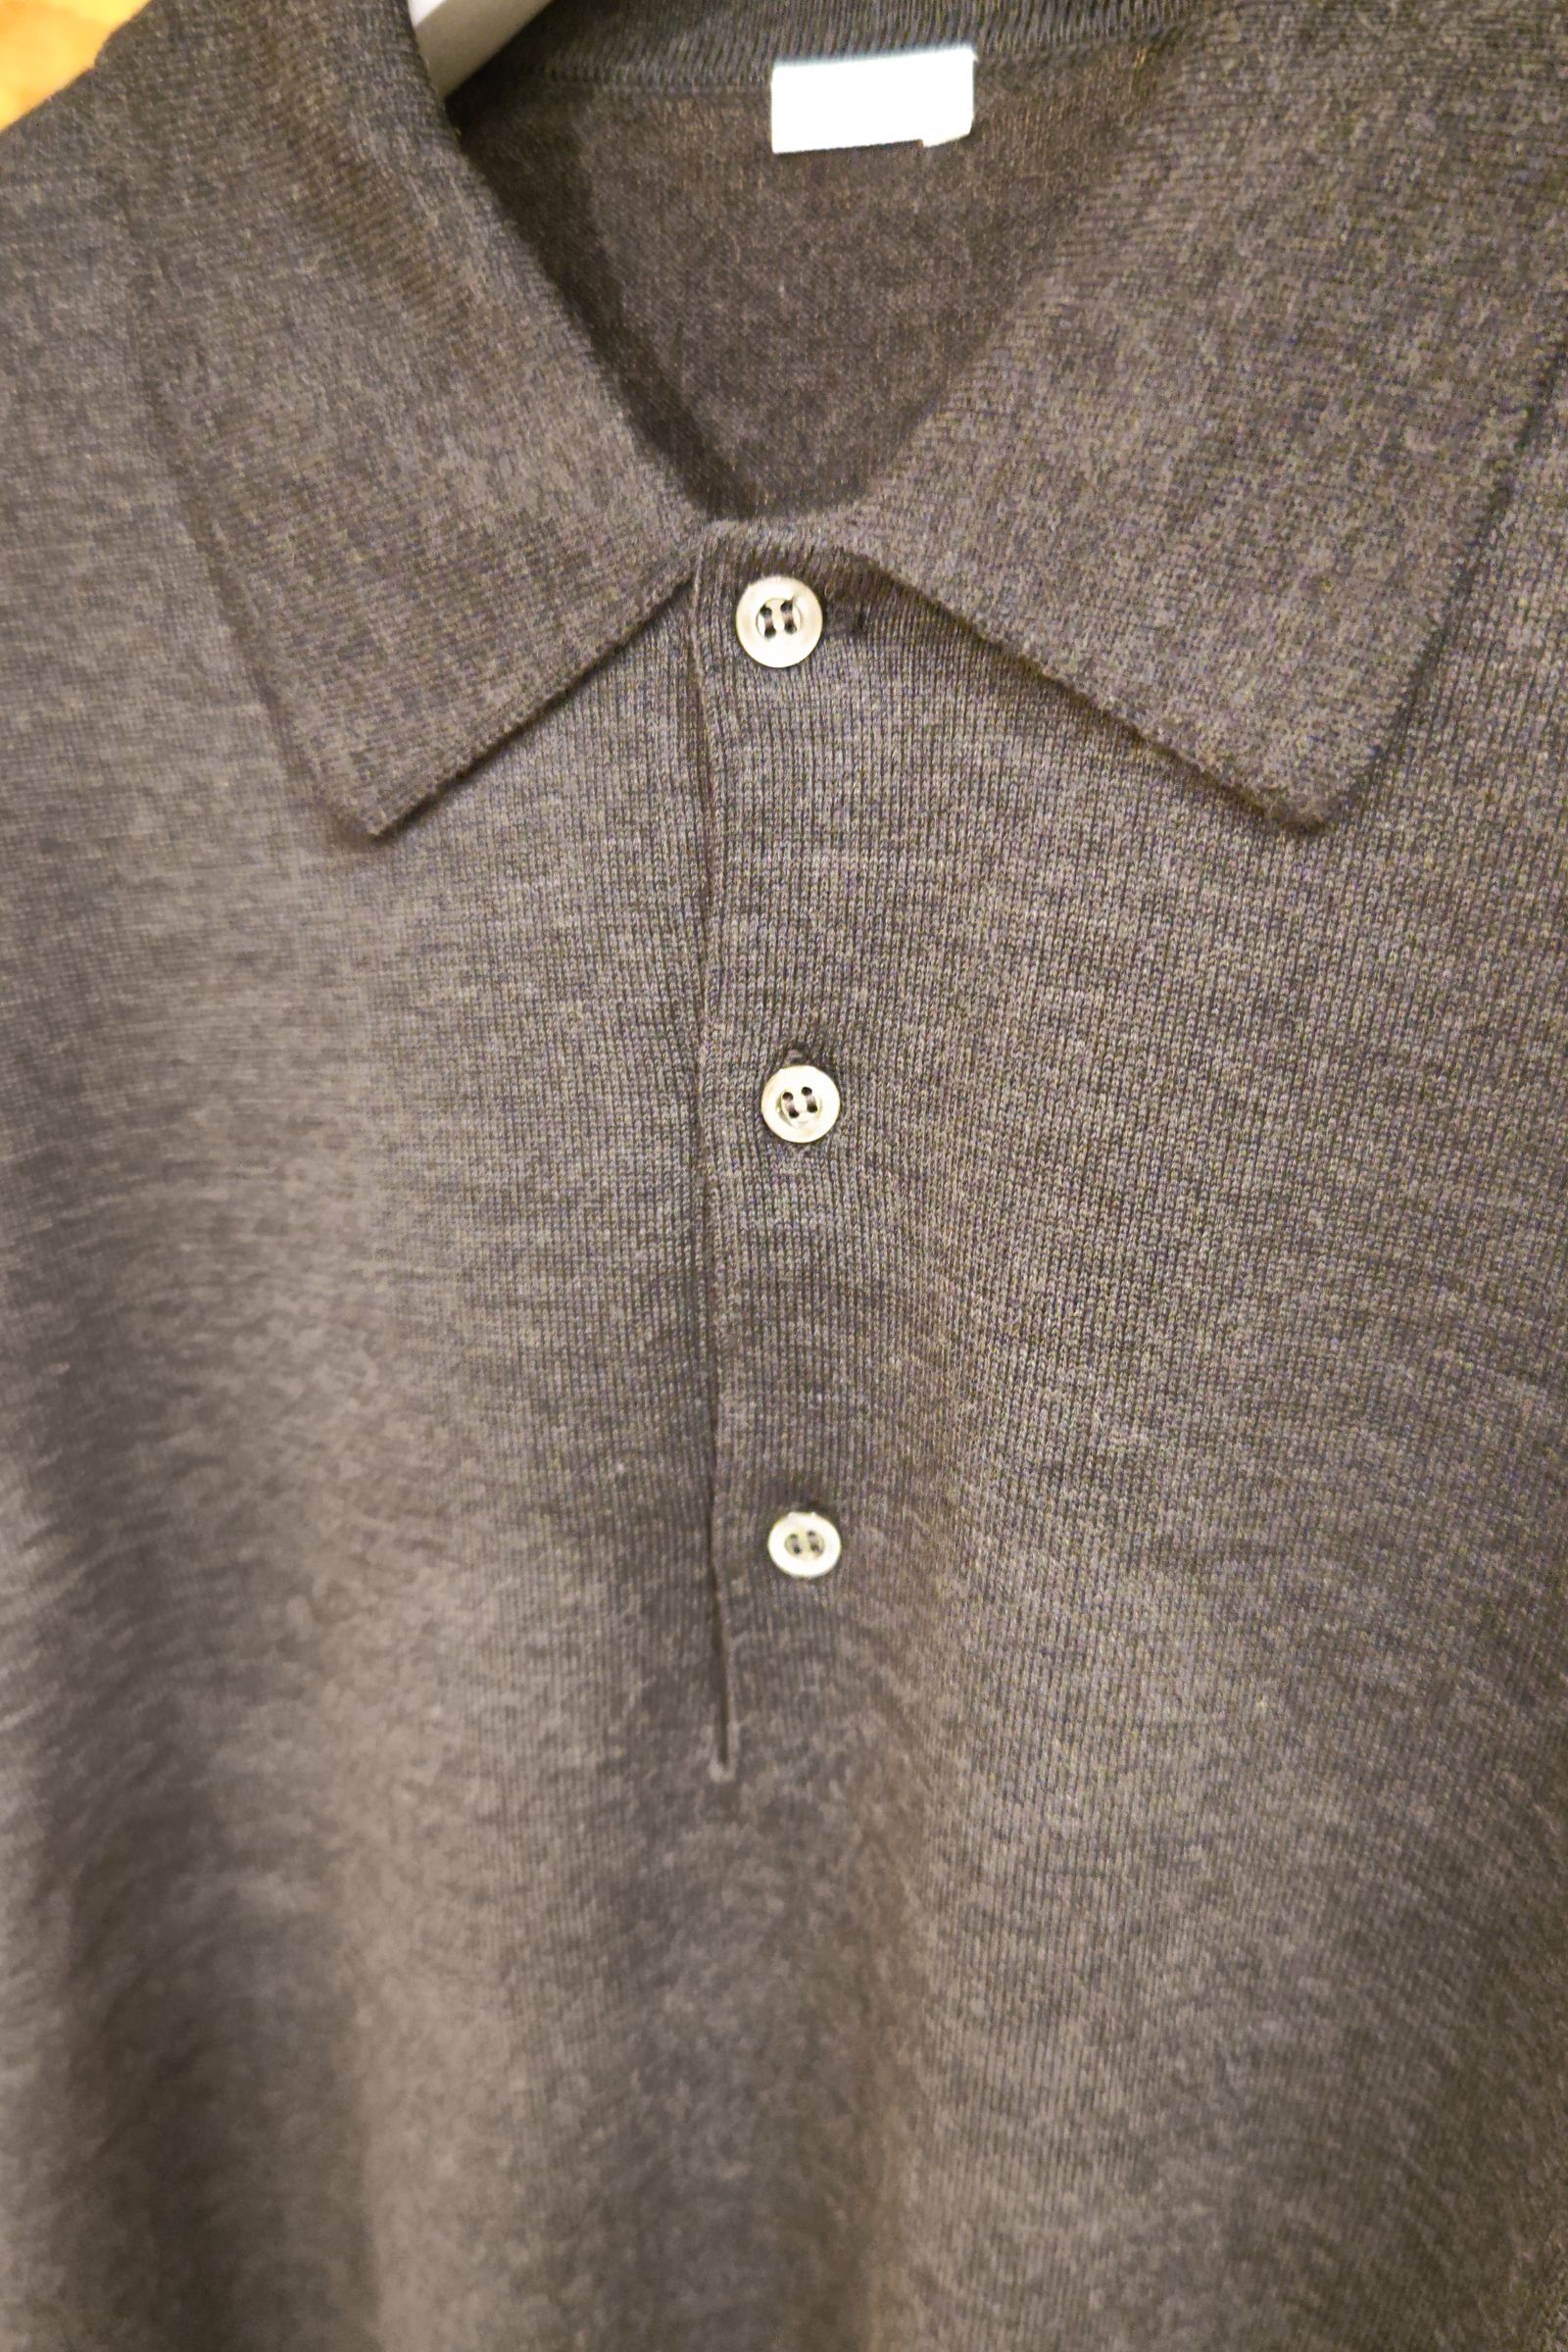 A.PRESSE - l/s knit polo shirts -charcoal- 22aw | asterisk